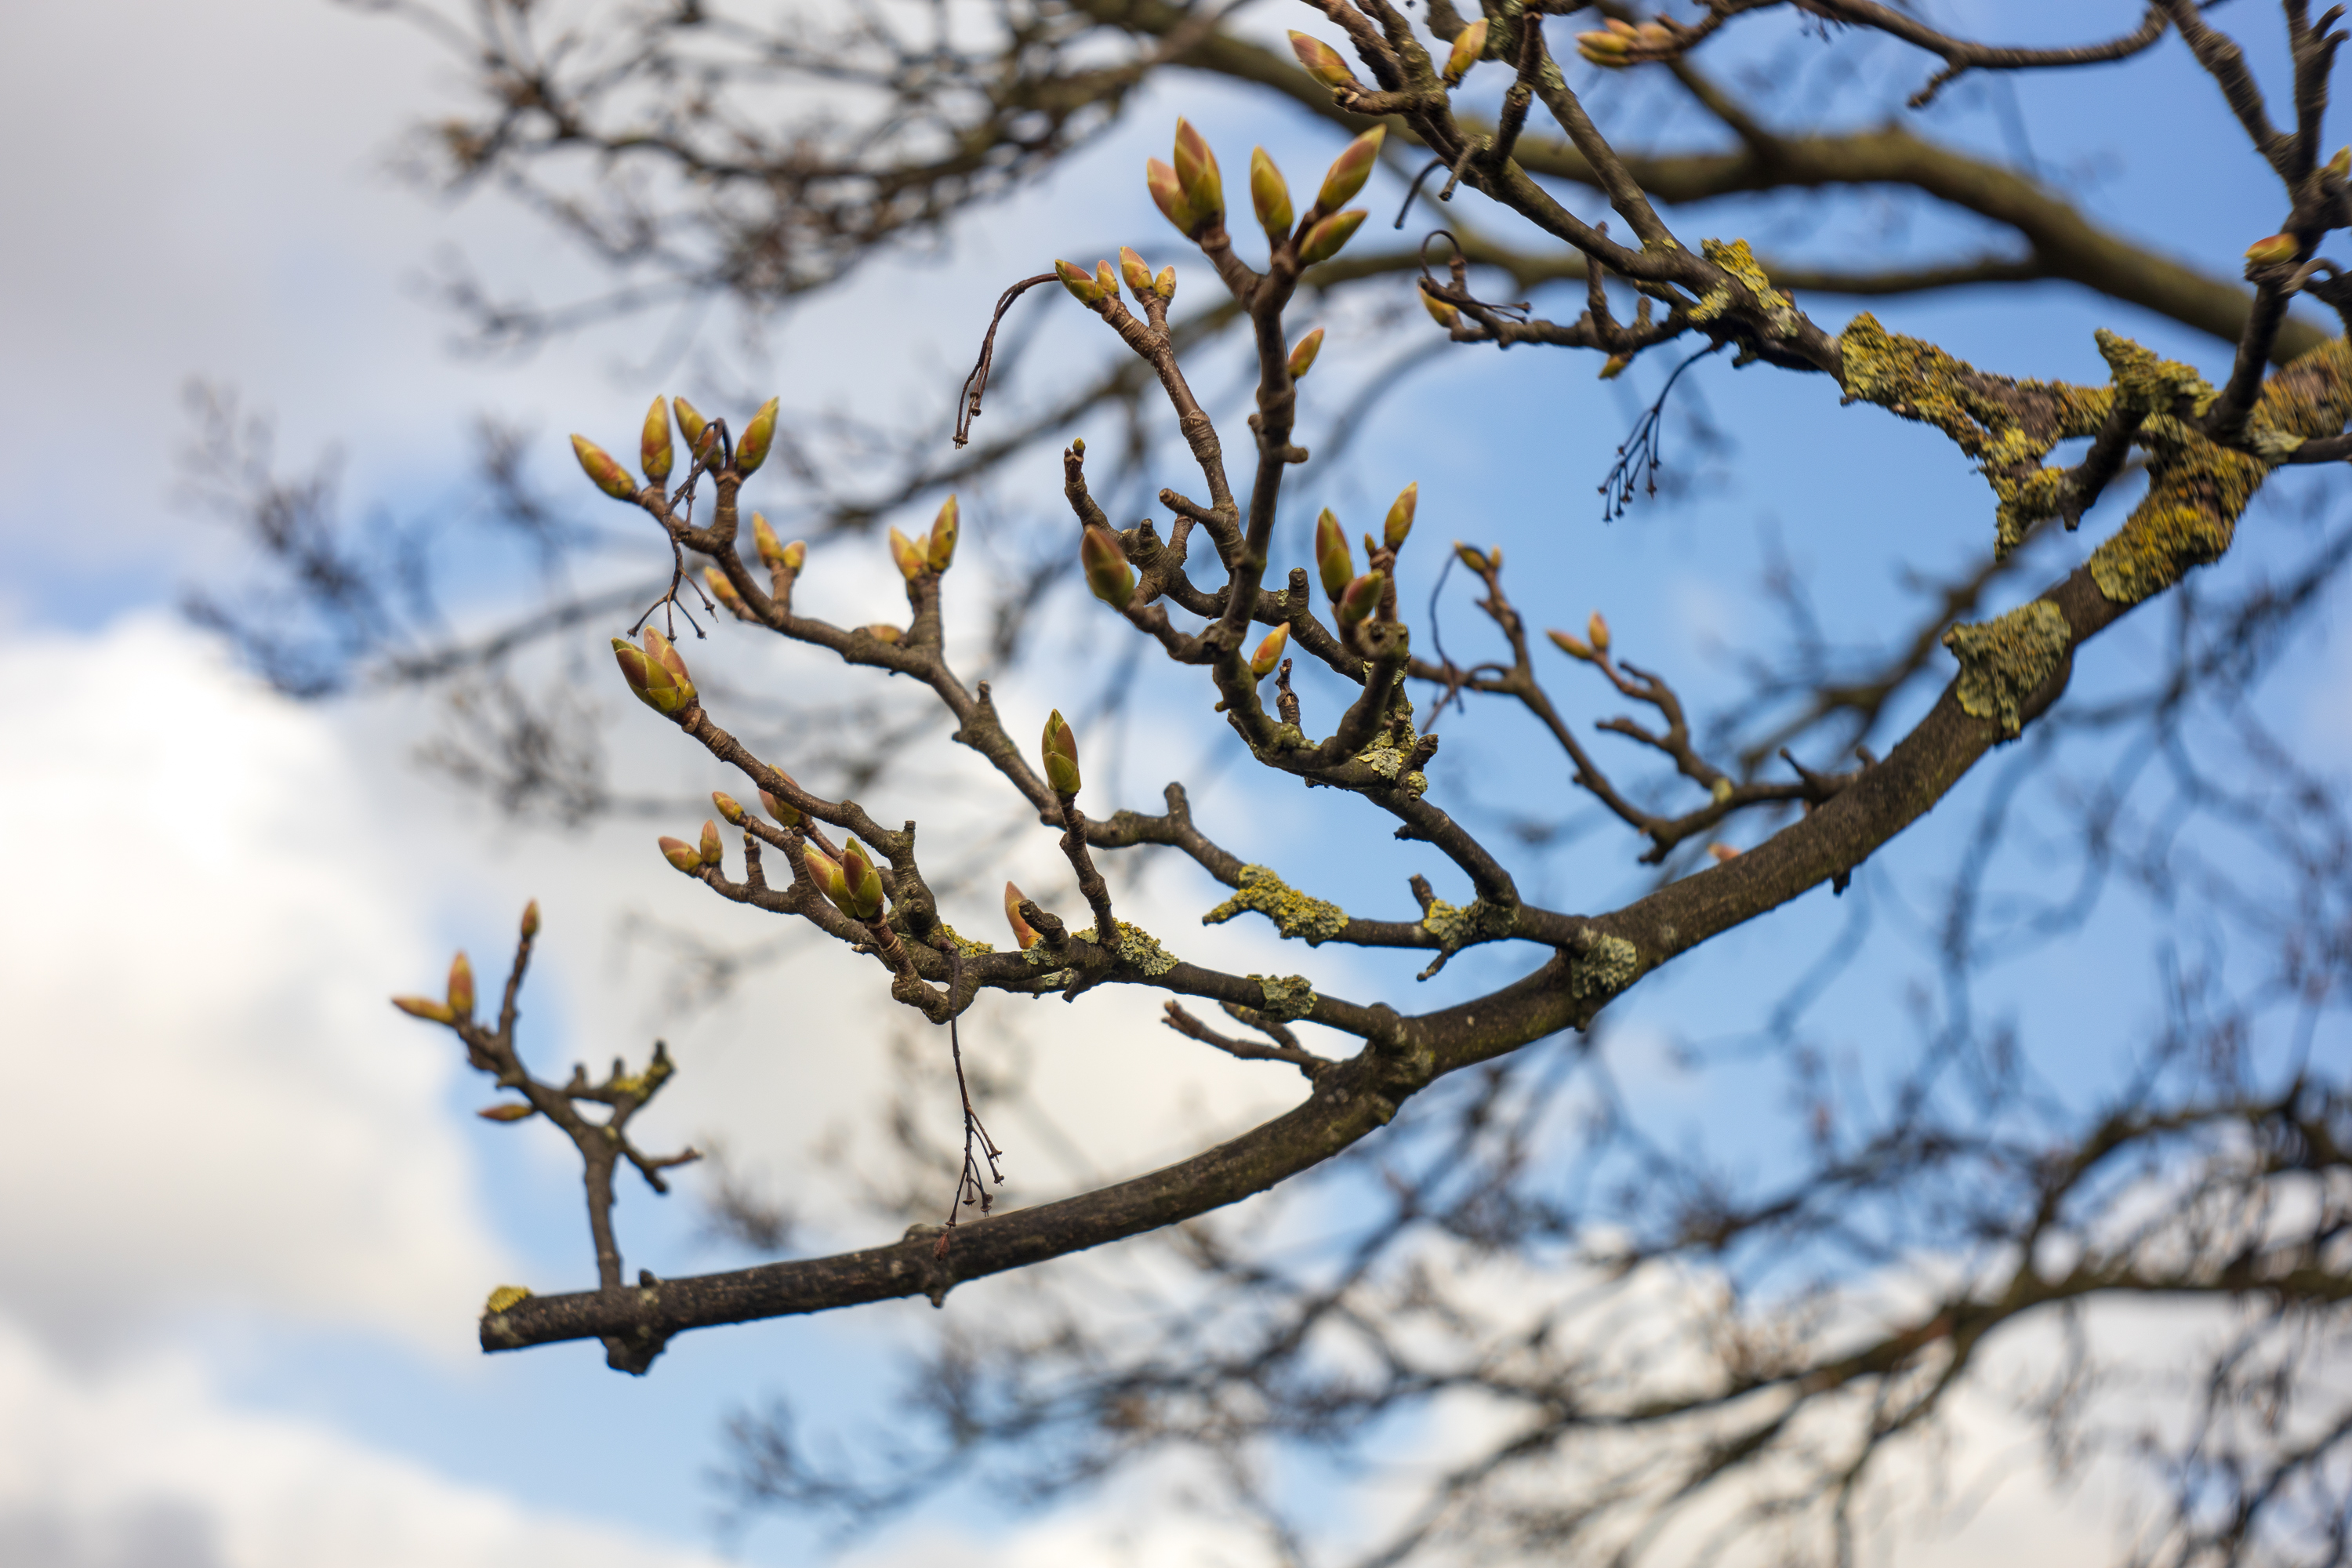 Sky and branches in Spring - Stopped down to f5.6